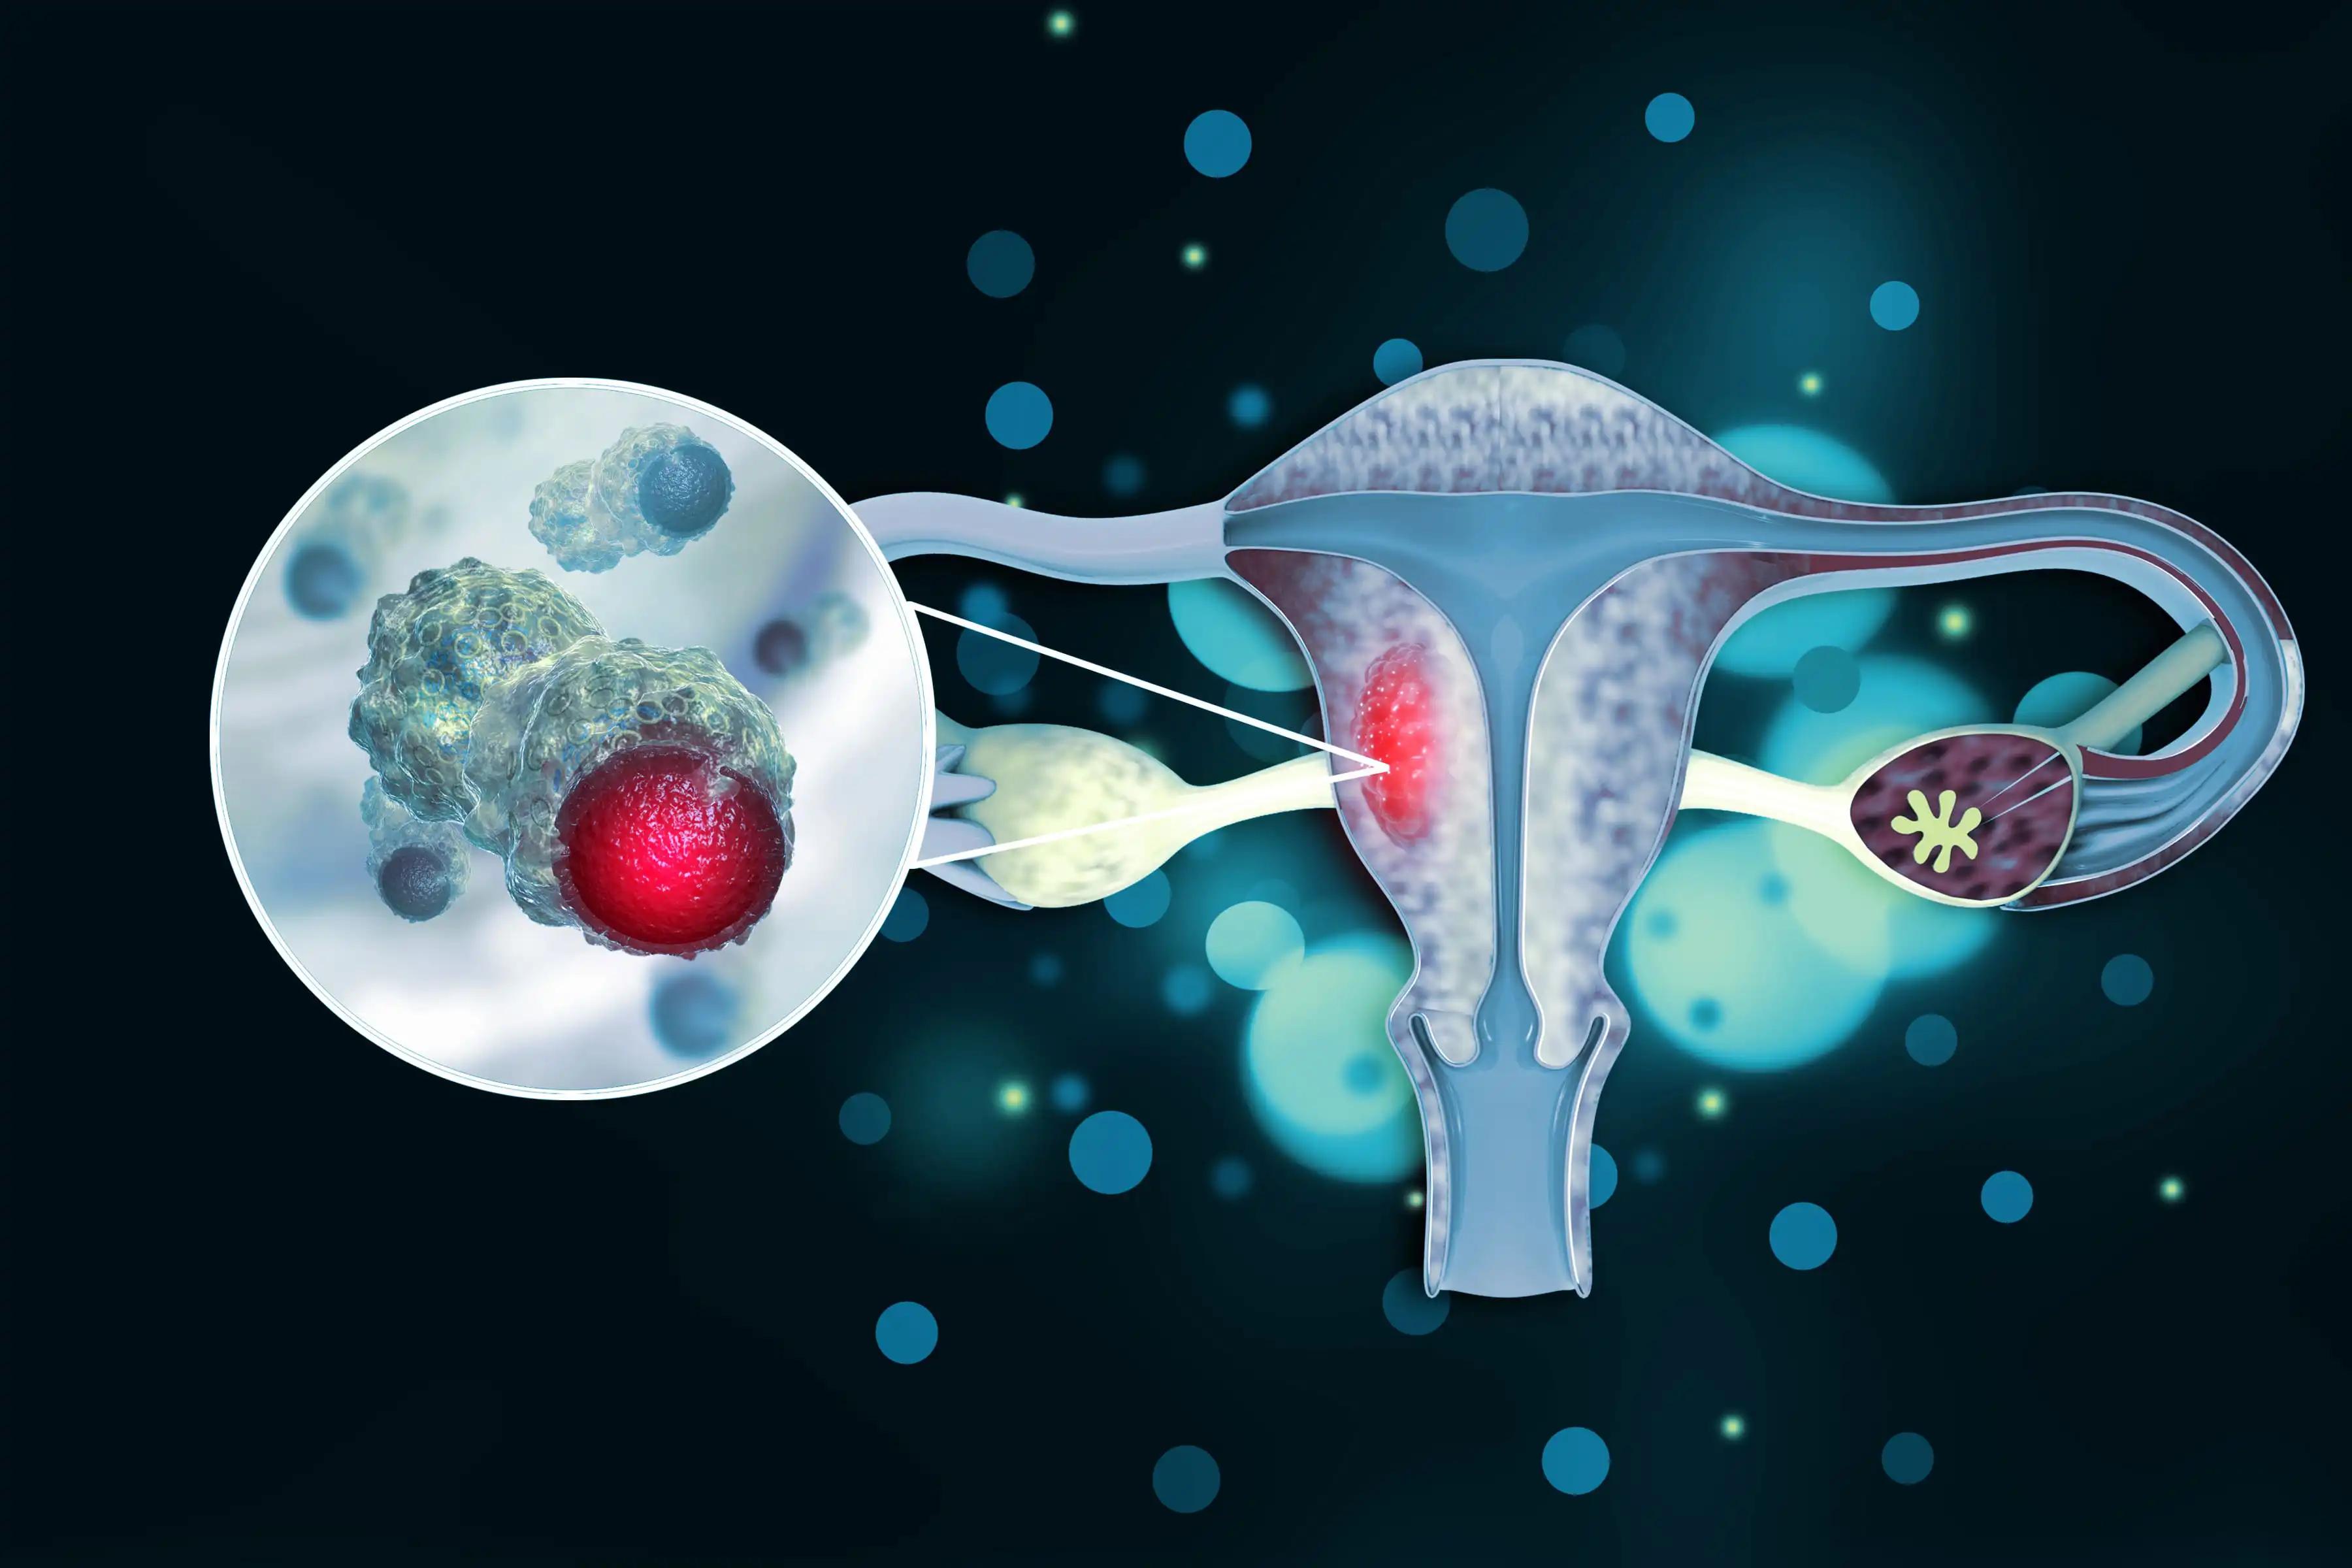 Bacteria Infection in Endometrial Cancer